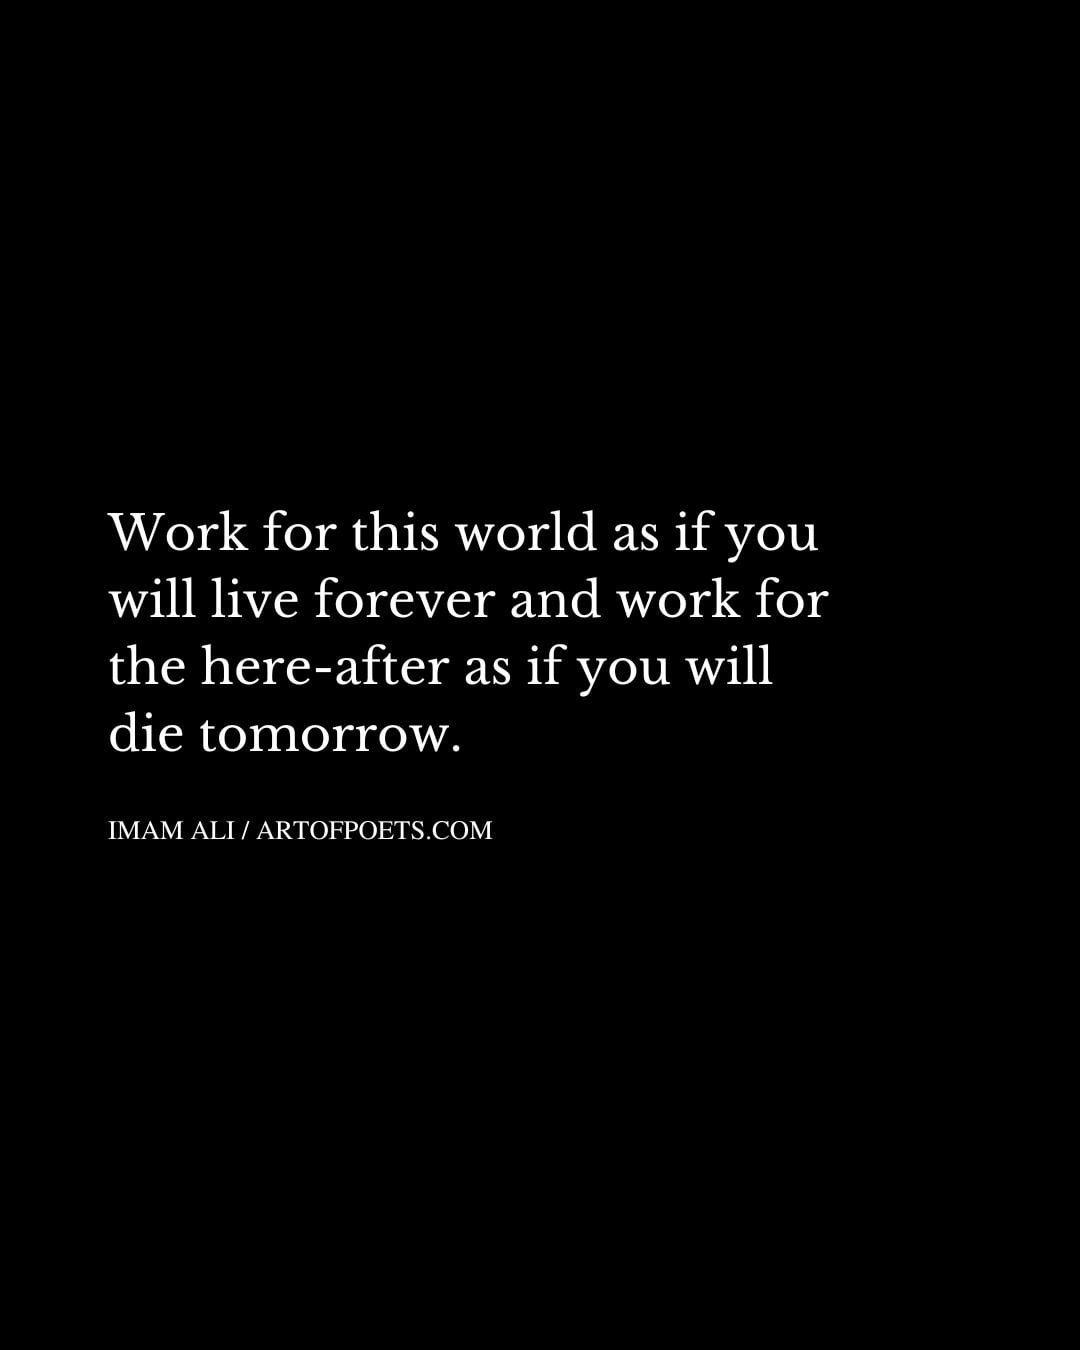 Work for this world as if you will live forever and work for the here after as if you will die tomorrow